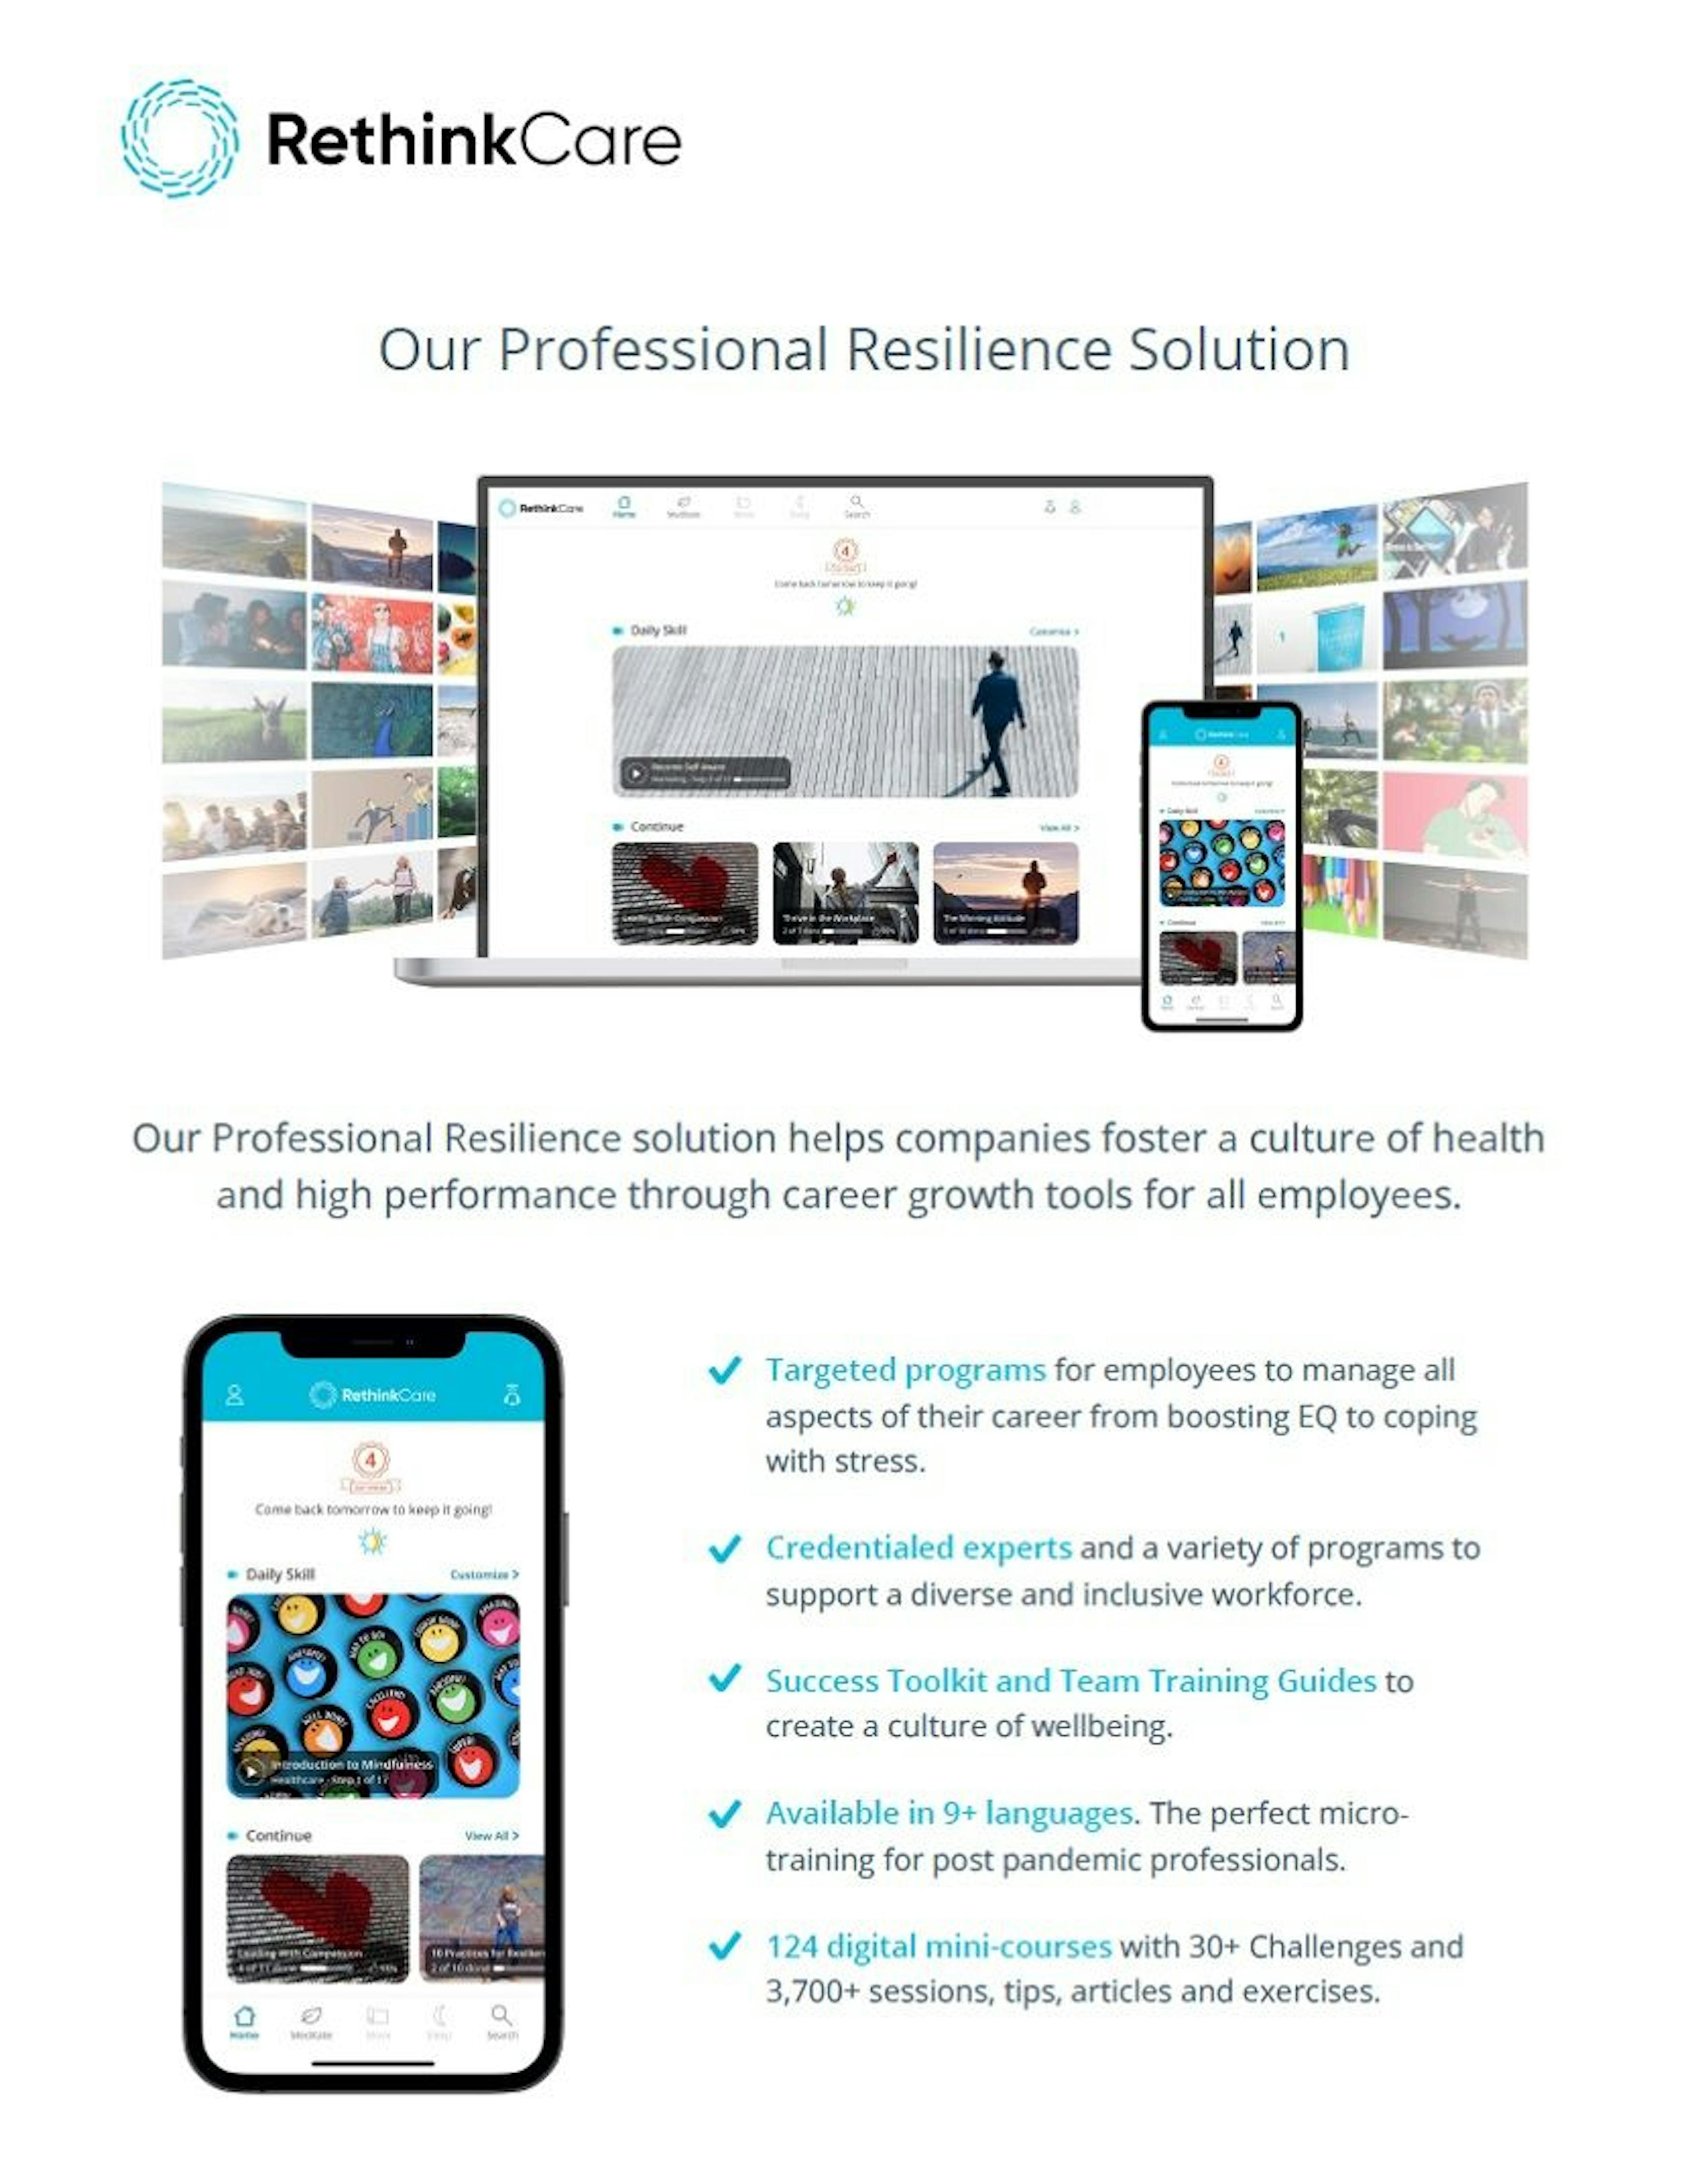 RethinkCare Professional Resilience Solution screenshots of computer and phone with overview of program offerings.